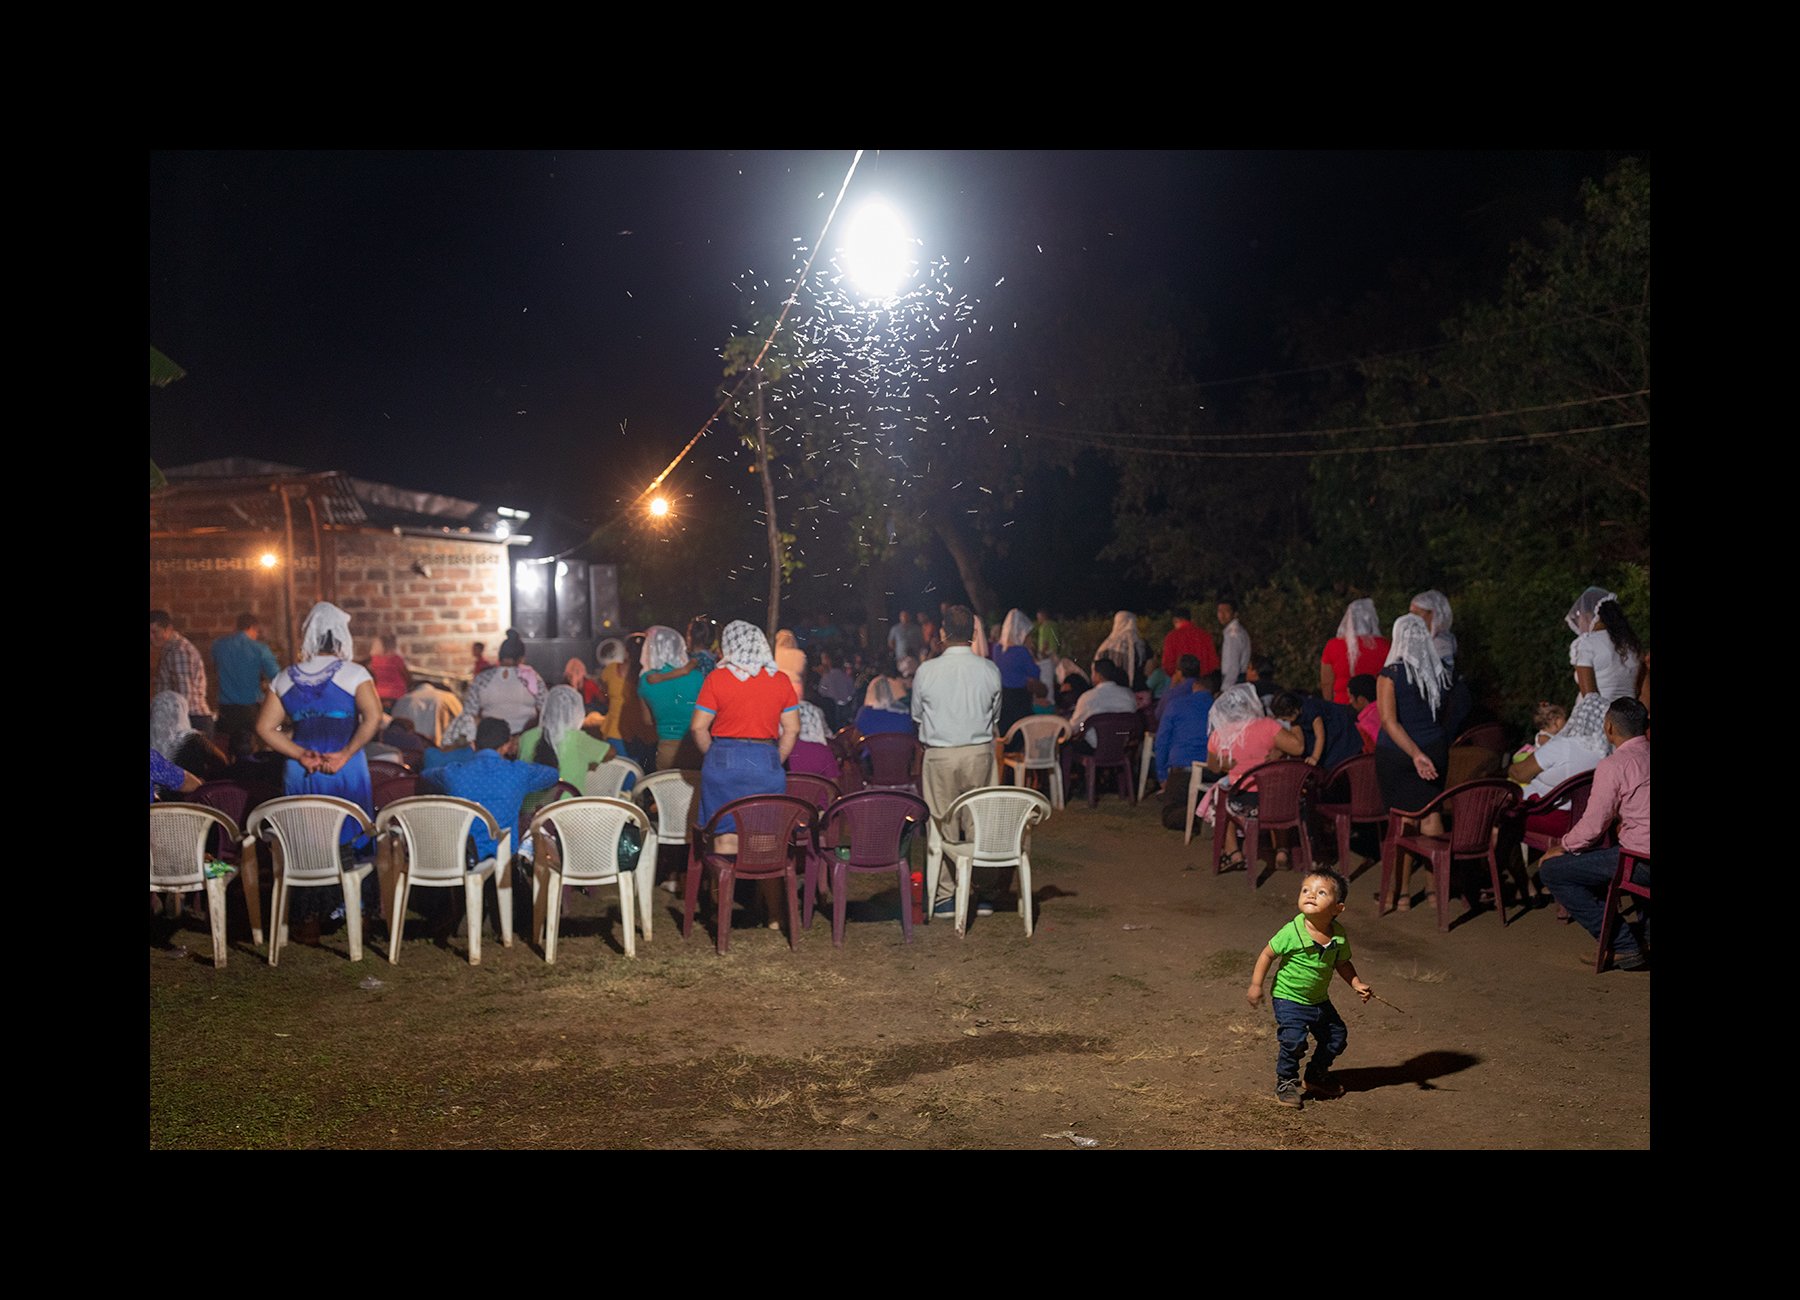  Community meeting to raise money for their community-built and maintained water system, which provides clean water to 1500 people, in Chichigalpa, Nicaragua on Feb. 23, 2020. 